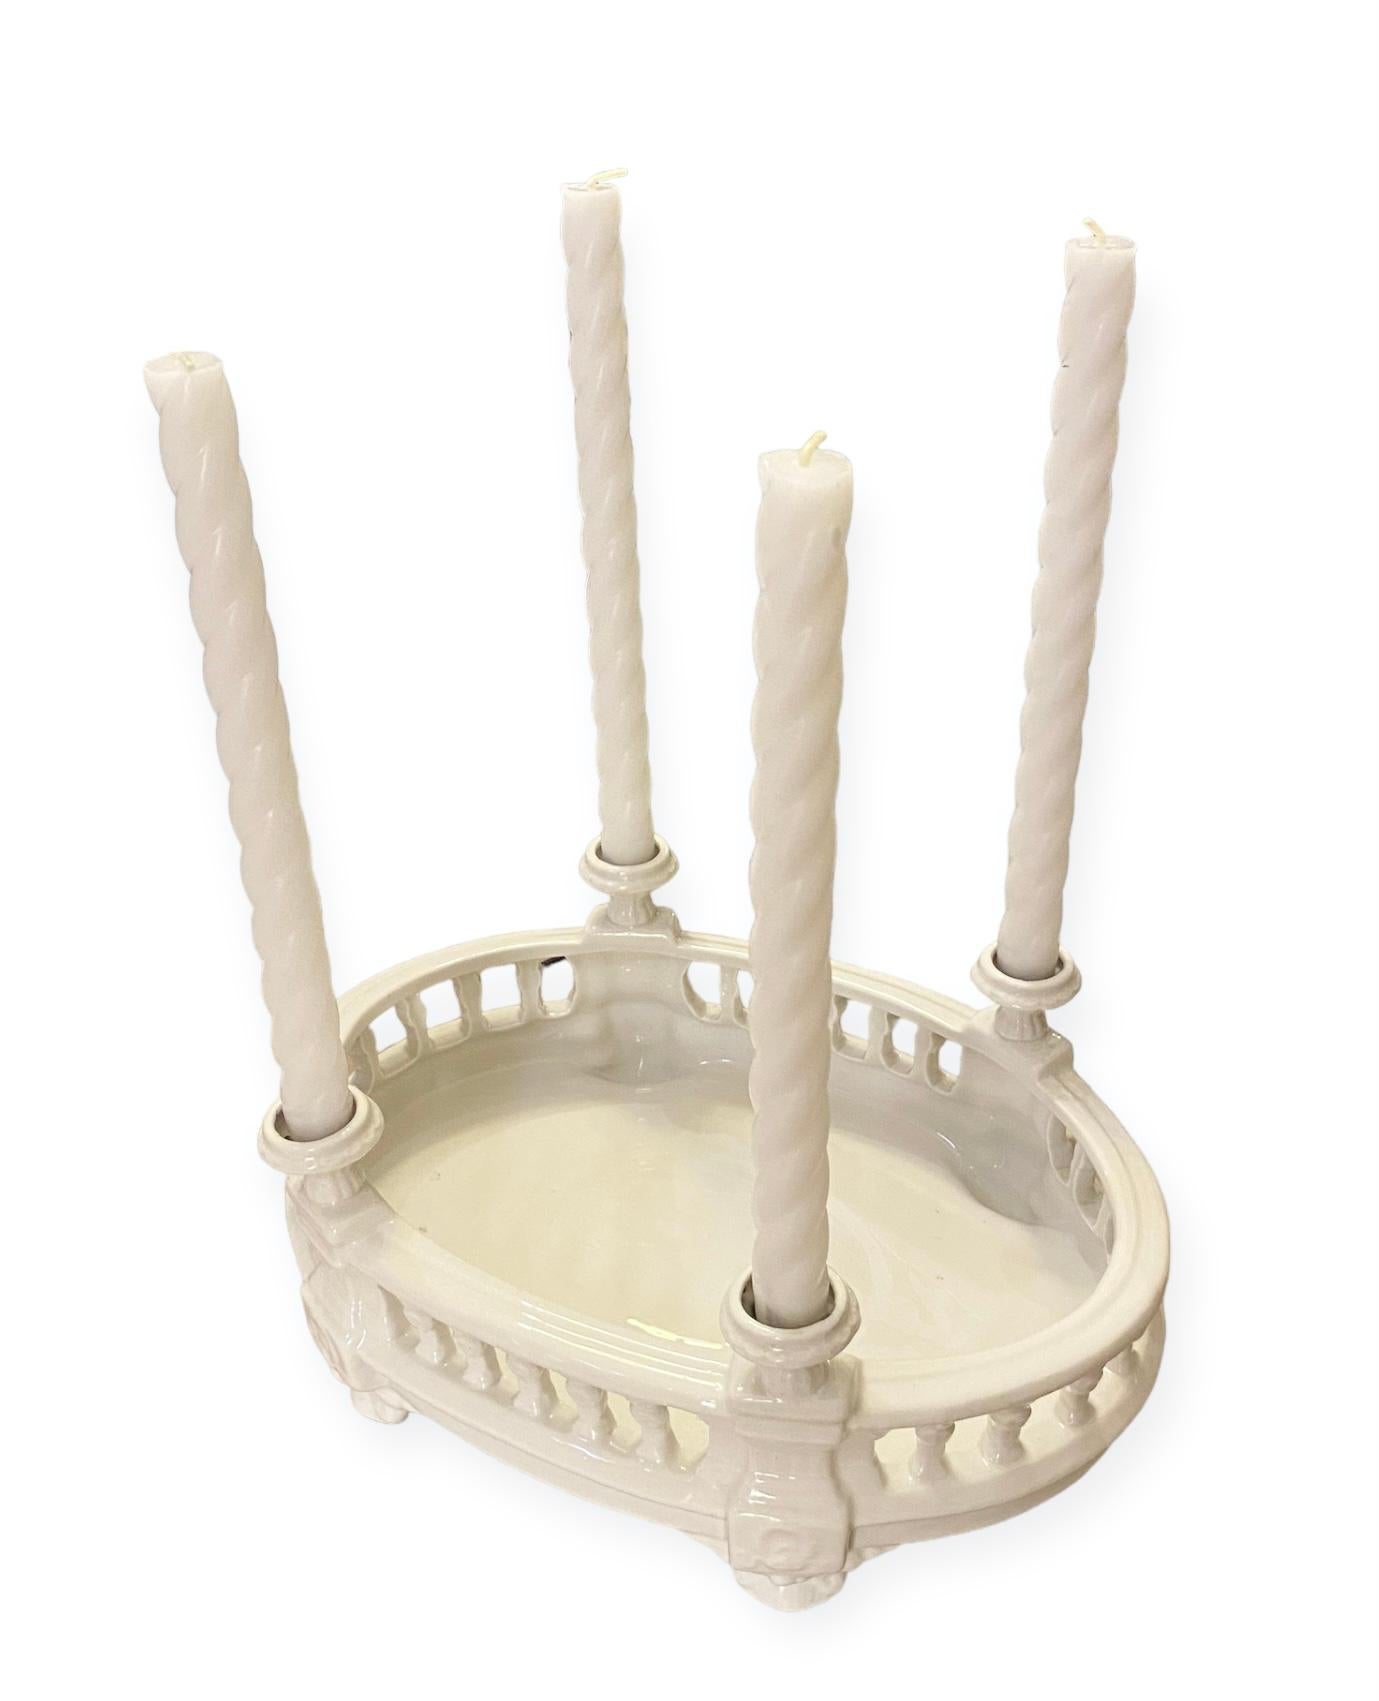 A lovely vintage Portuguese, crème ceramic centerpiece having a balustrade with four vases for candles.